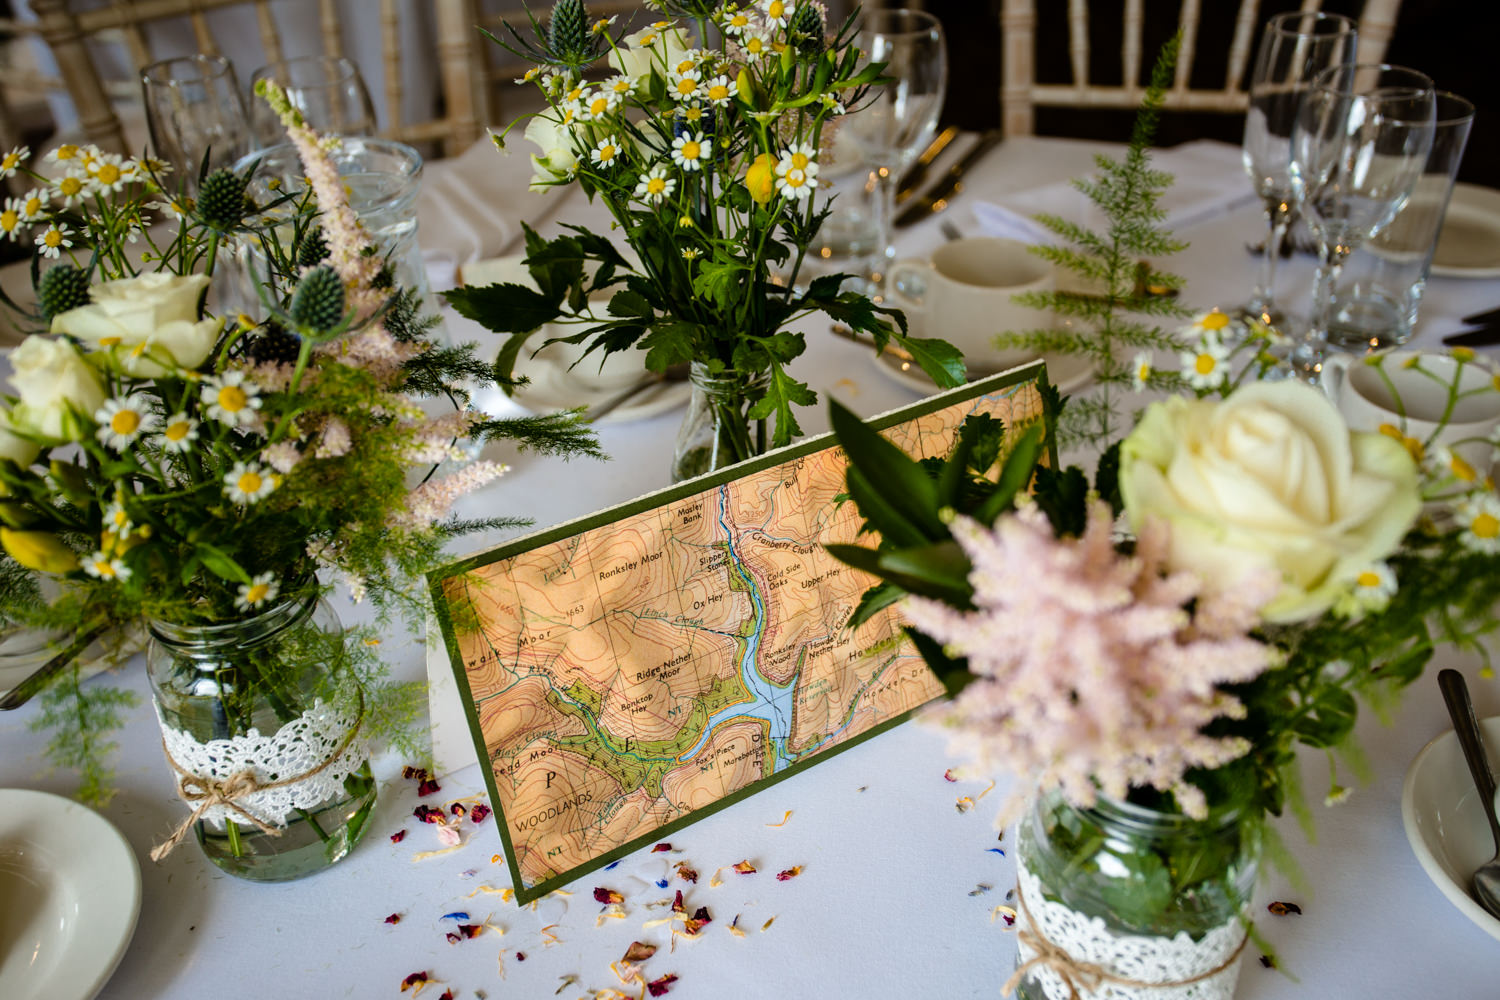 Wedding table decor inspired by The Peak District.